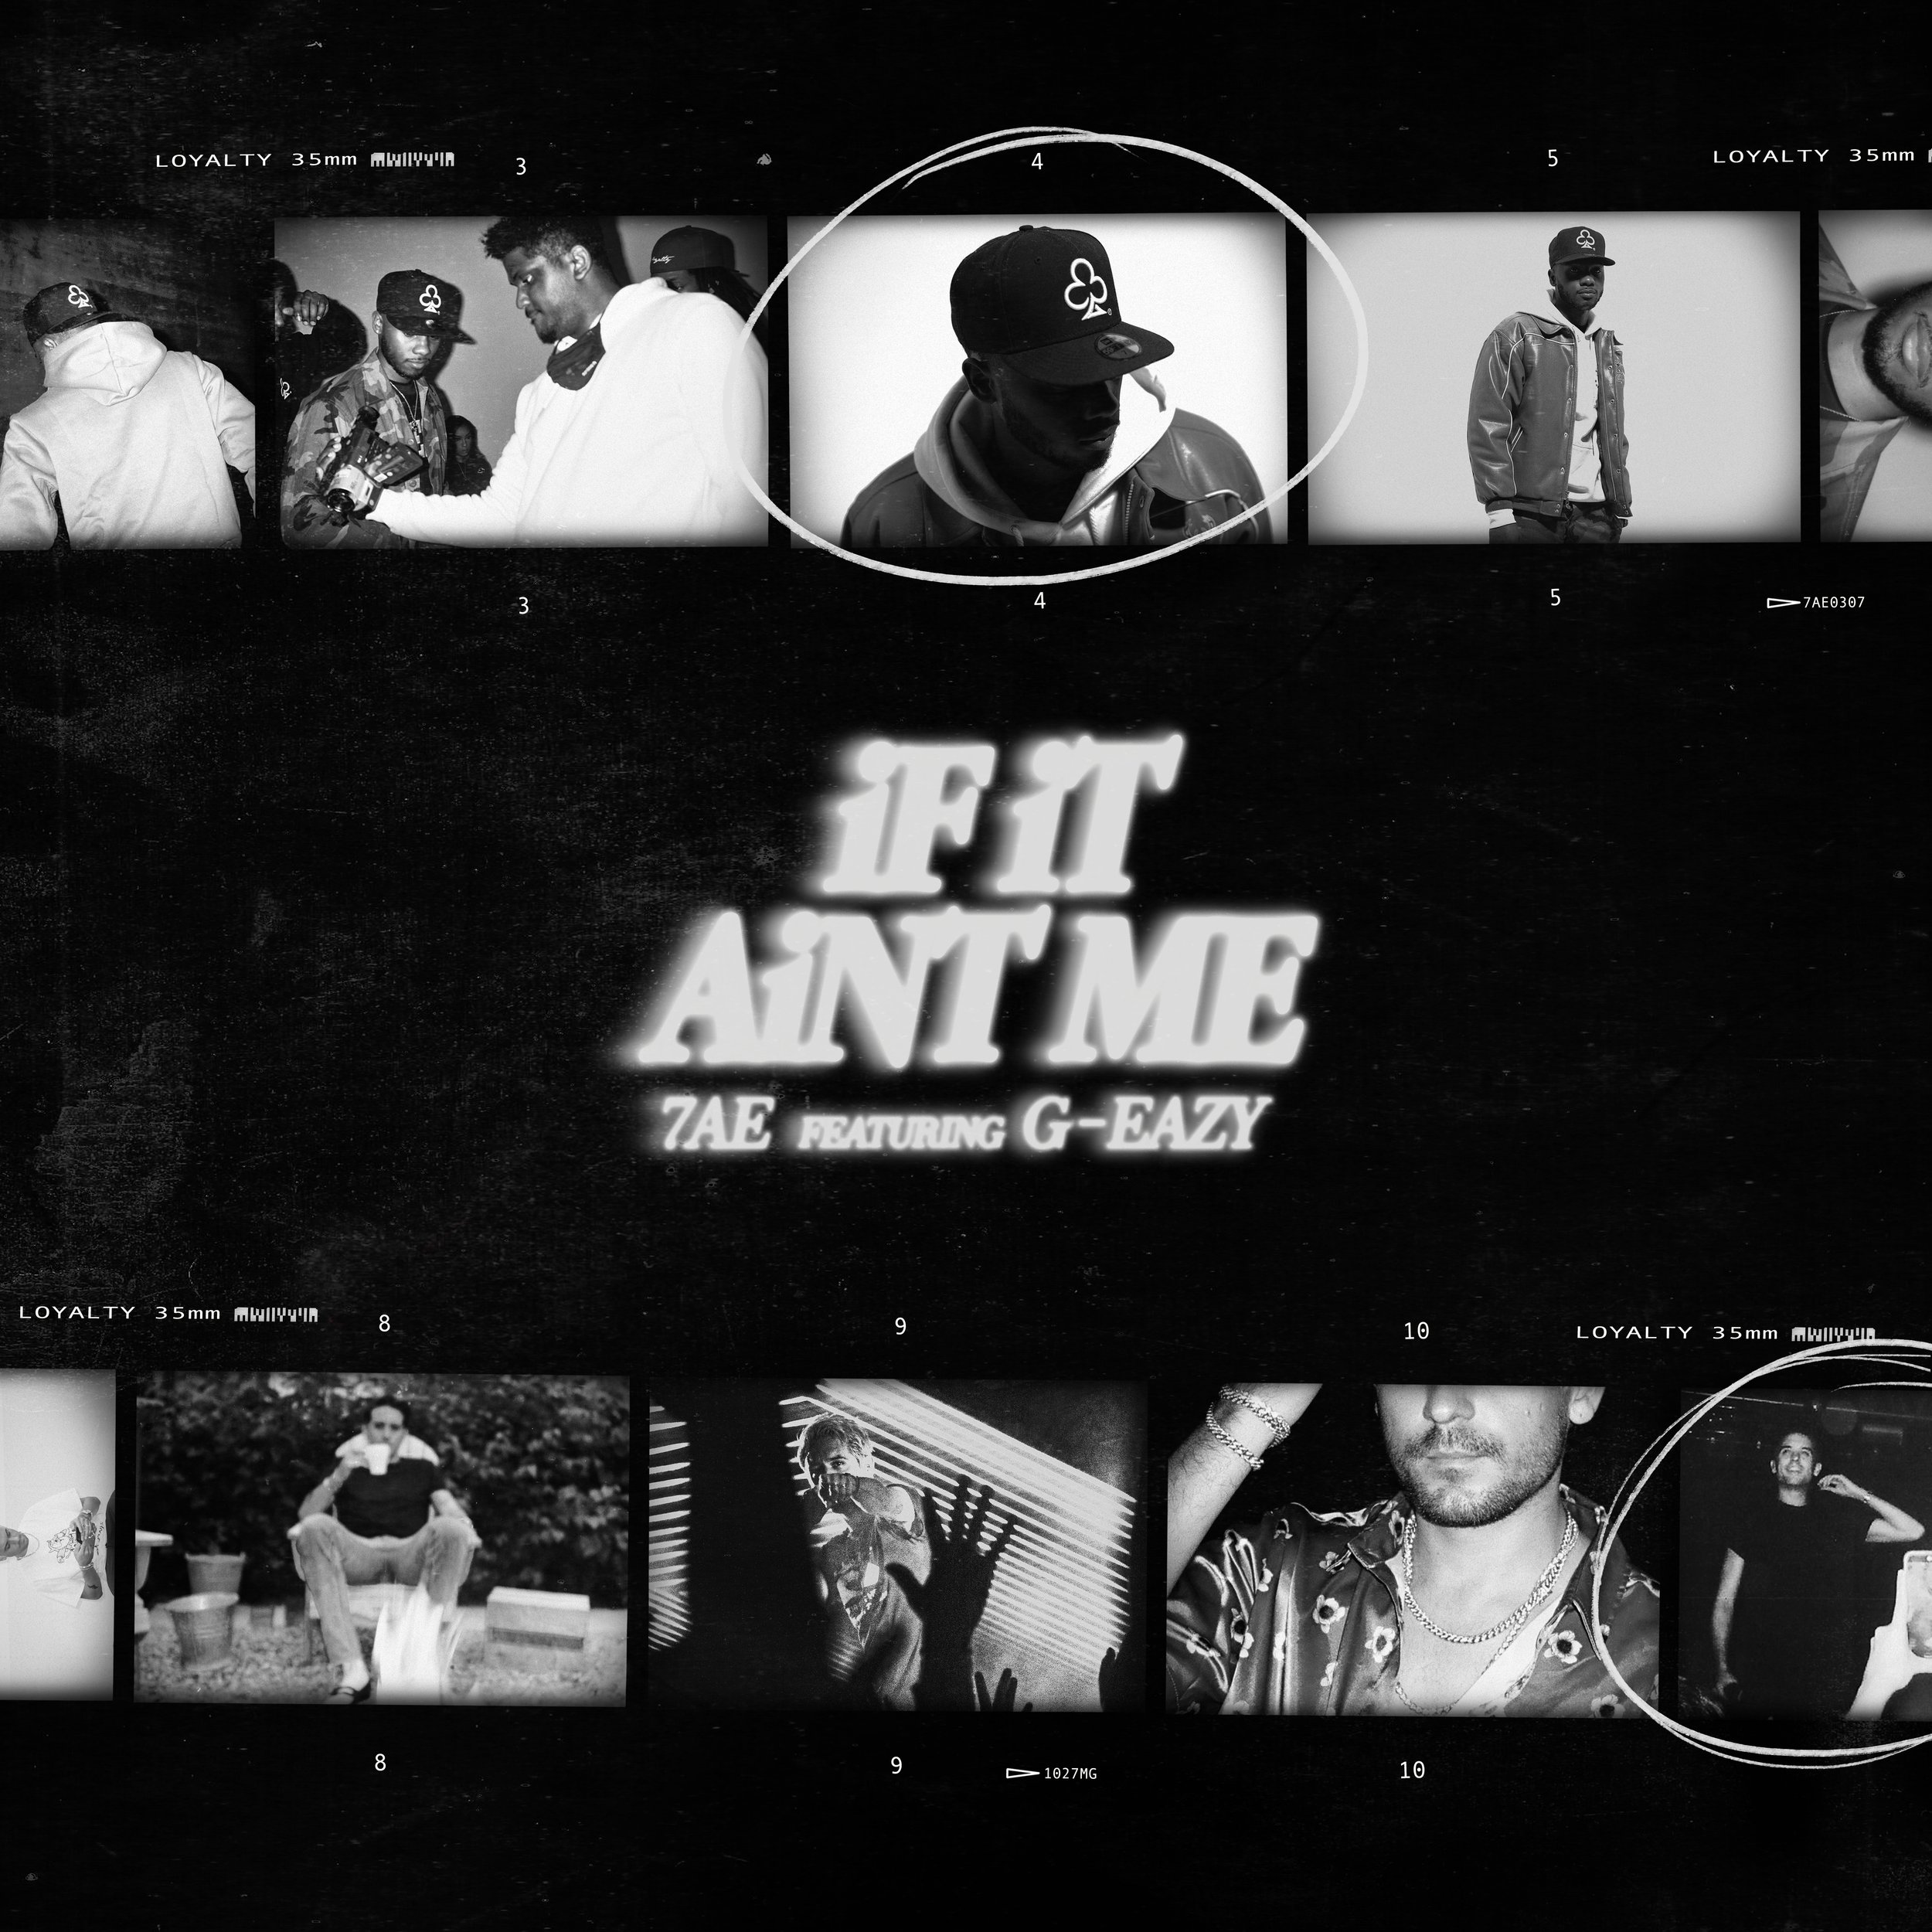 Photos of 7AE by thelifeofrayno - Photos of G-Eazy by Blizzy & Mike G - Design by Mike G